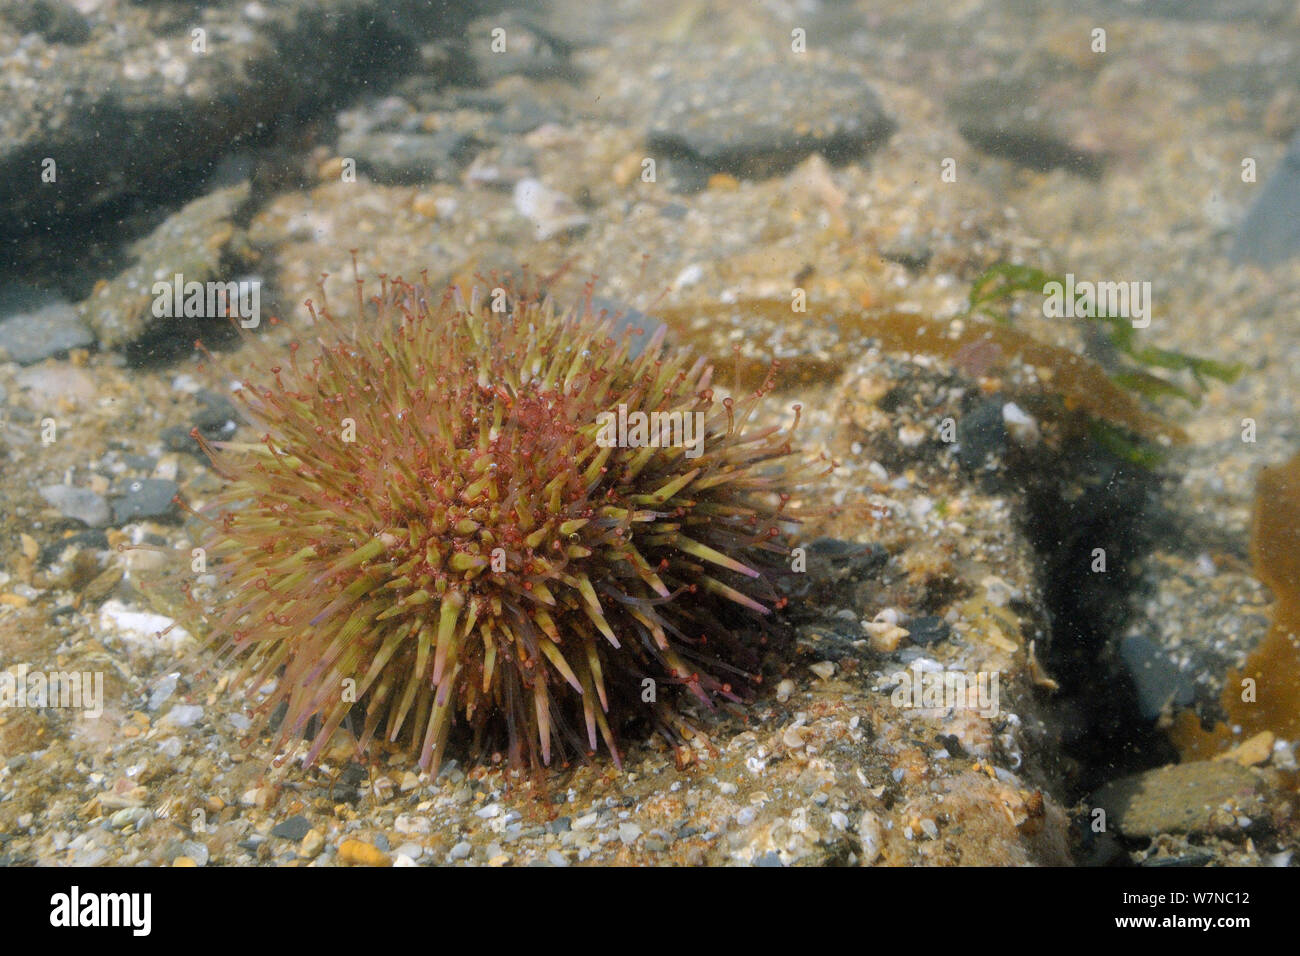 Green / Purple-tipped sea urchin (Psammechinus miliaris) in a rockpool low on the shore, near Falmouth, Cornwall, UK, August. Stock Photo